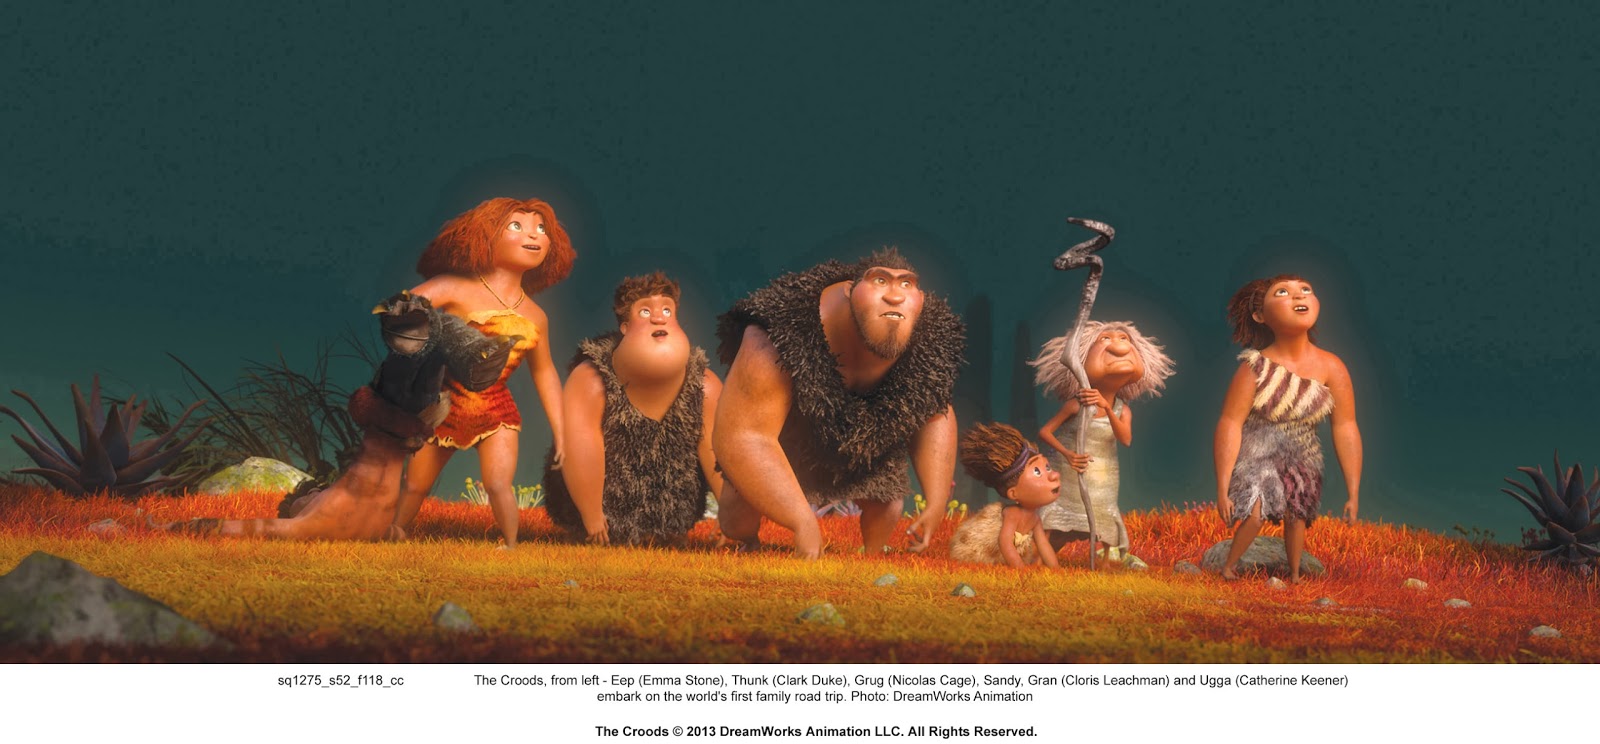 , Great Christmas Stocking Filler:  THE CROODS DVD